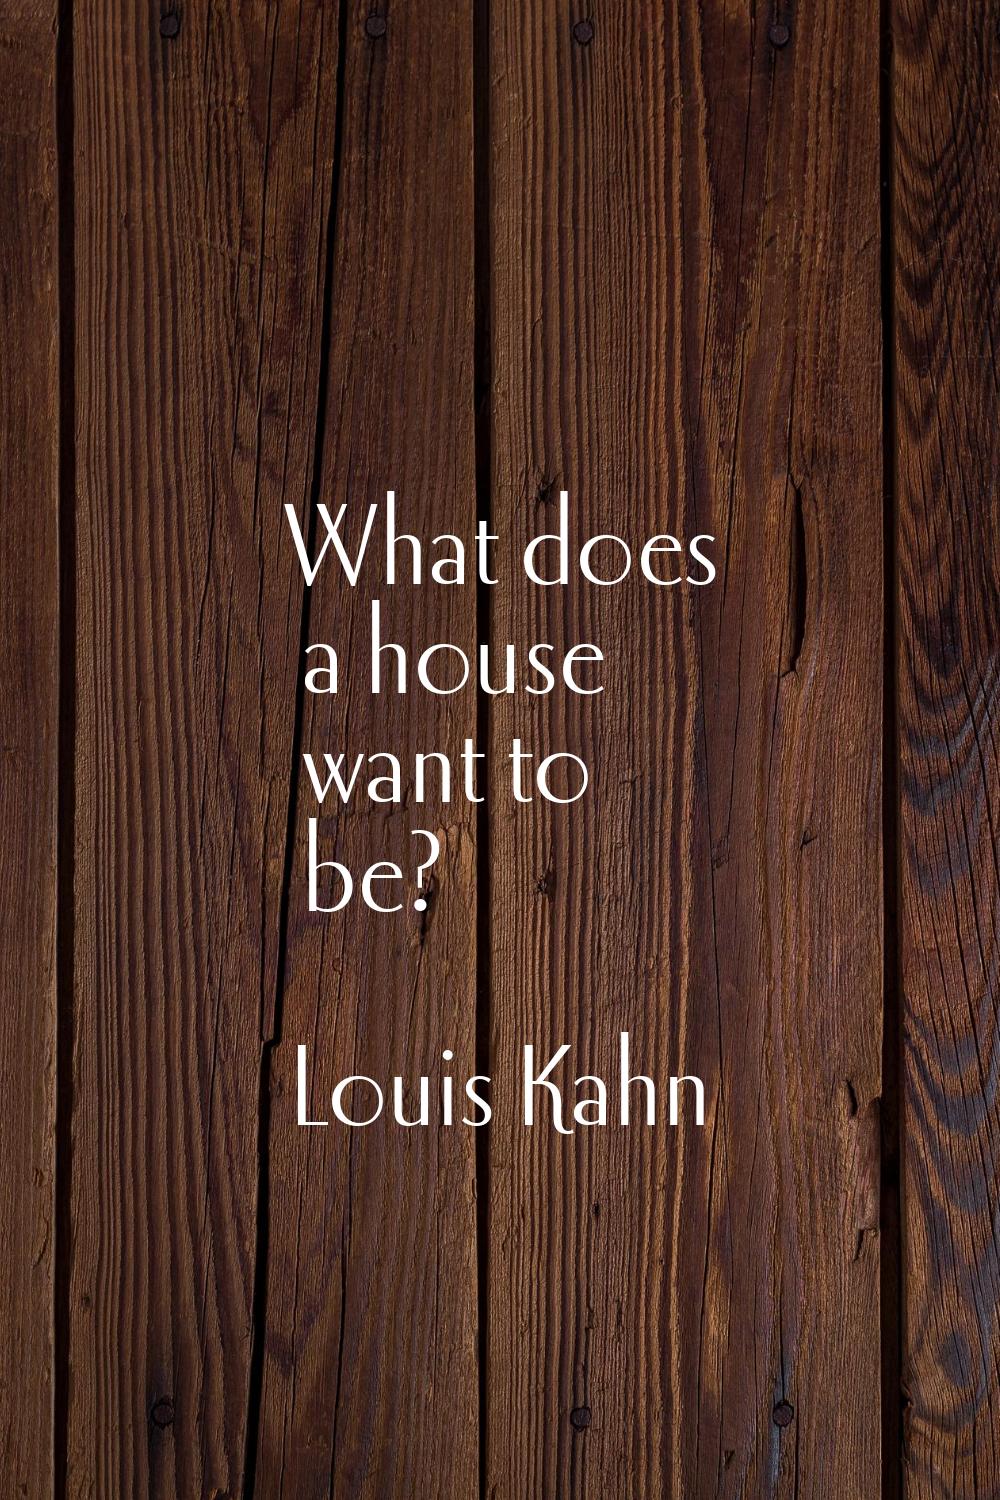 What does a house want to be?